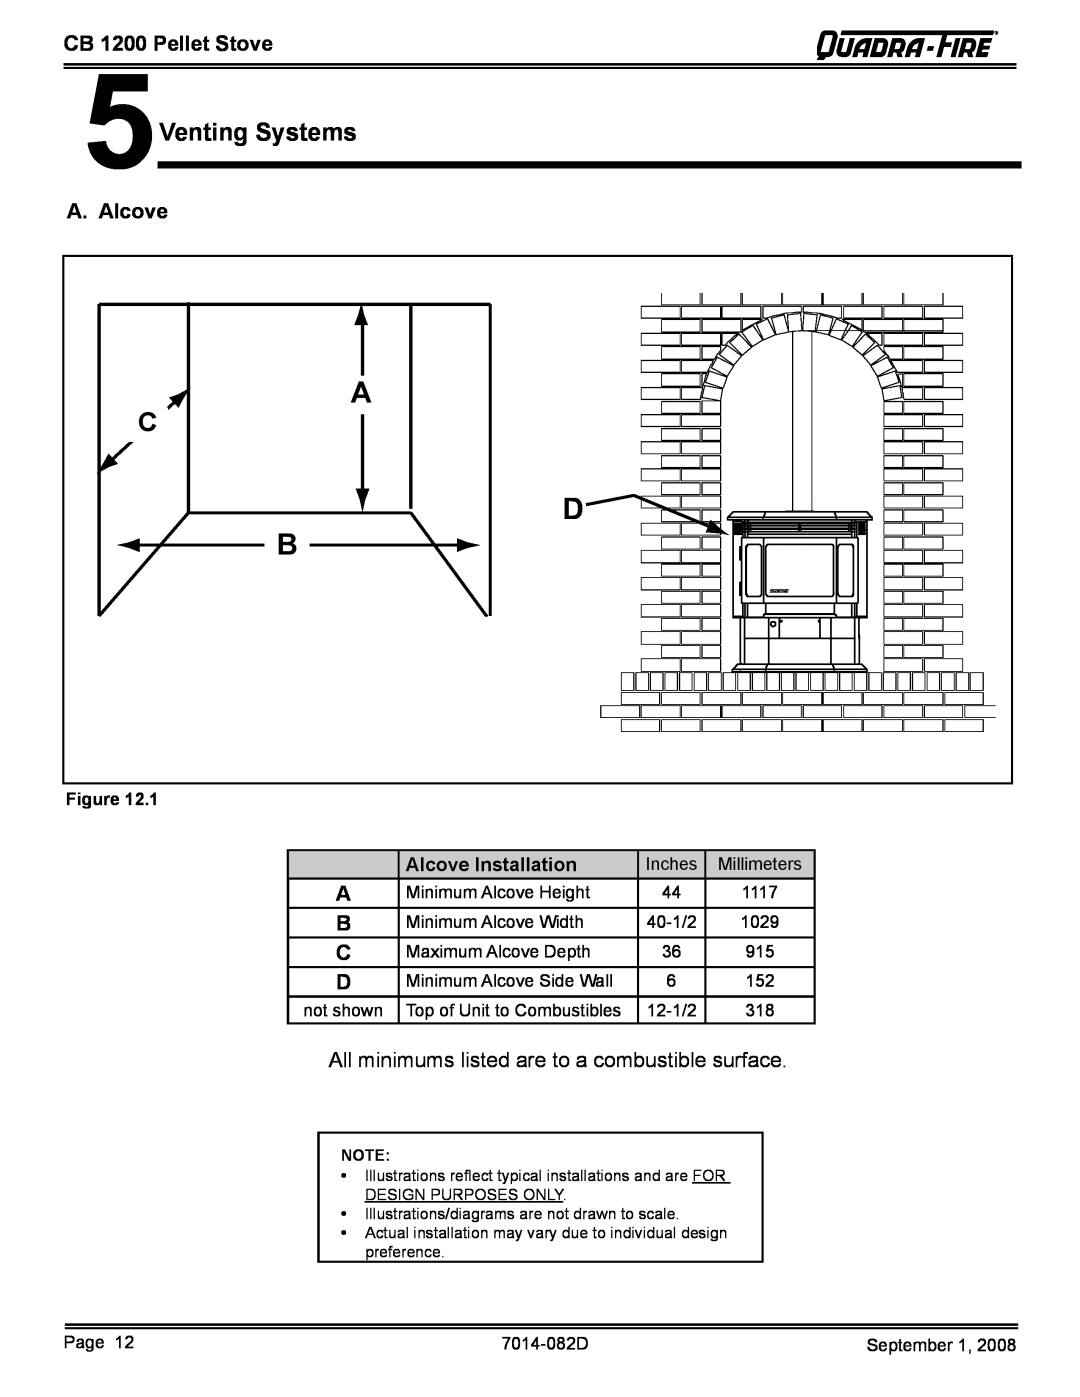 Quadra-Fire CB1200-B 5Venting Systems, A. Alcove, All minimums listed are to a combustible surface, CB 1200 Pellet Stove 